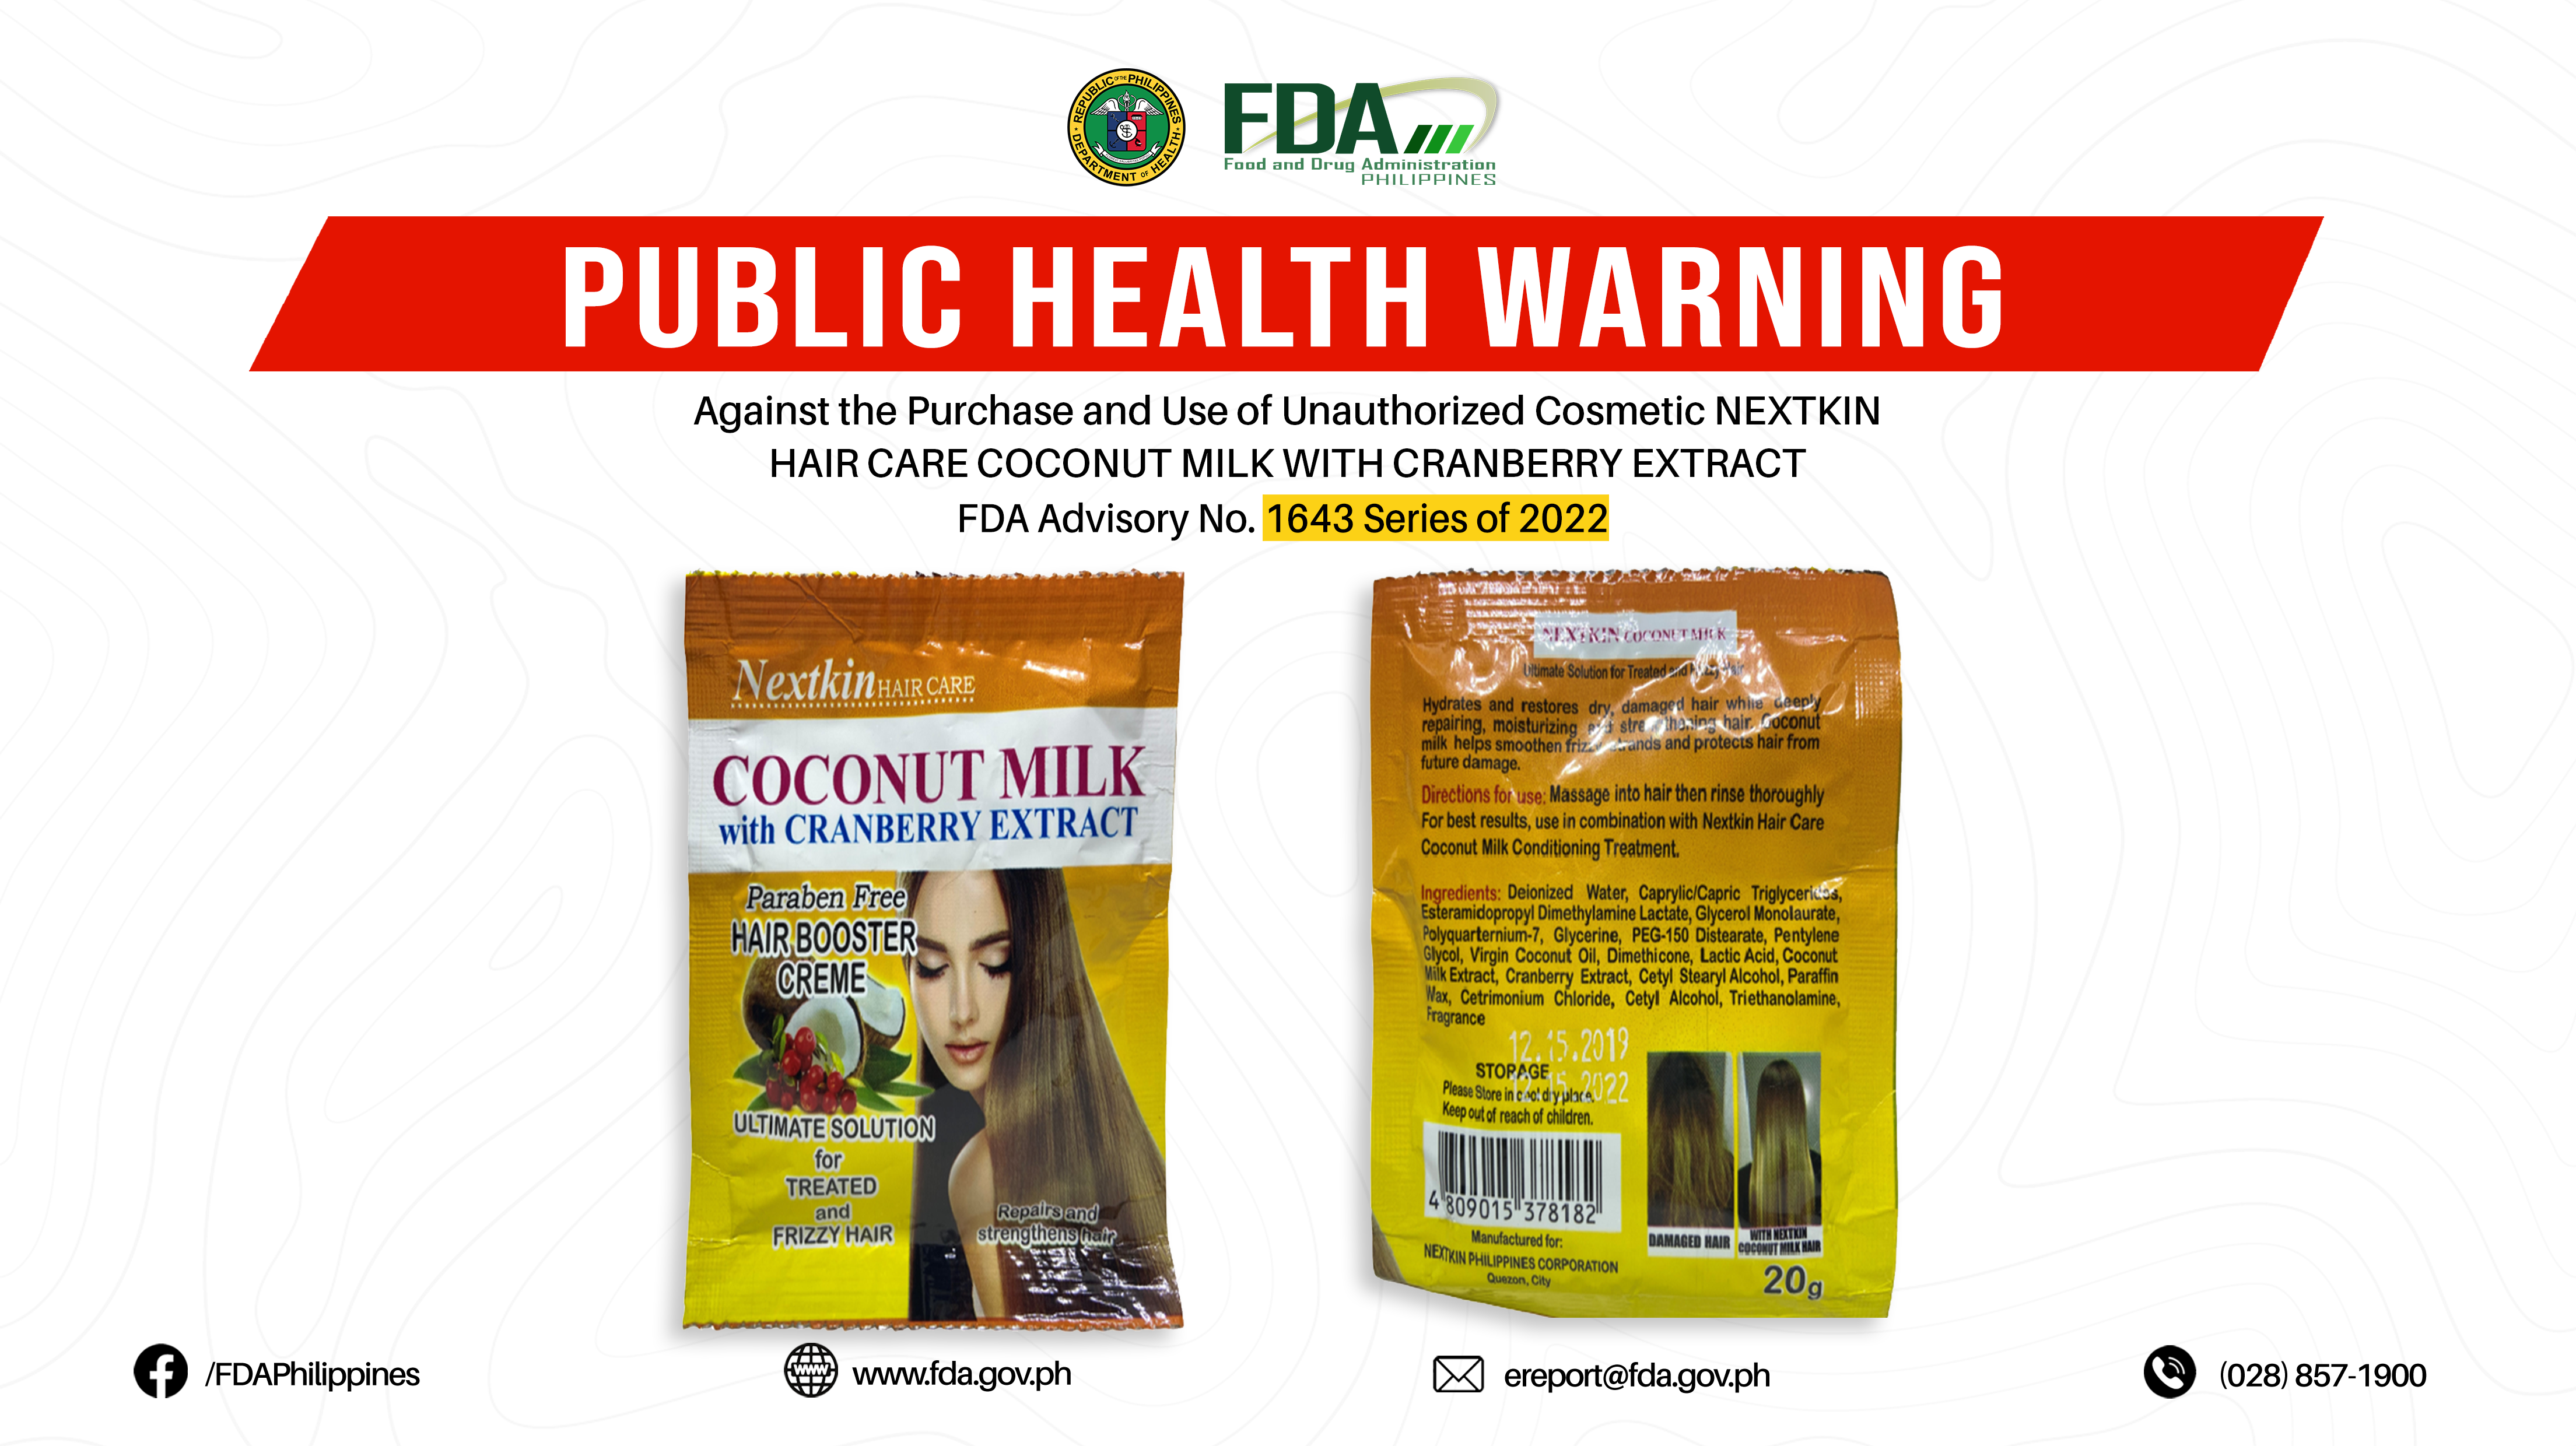 FDA Advisory No.2022-1643 || Public Health Warning Against the Purchase and Use of Unauthorized Cosmetic NEXTKIN HAIR CARE COCONUT MILK WITH CRANBERRY EXTRACT